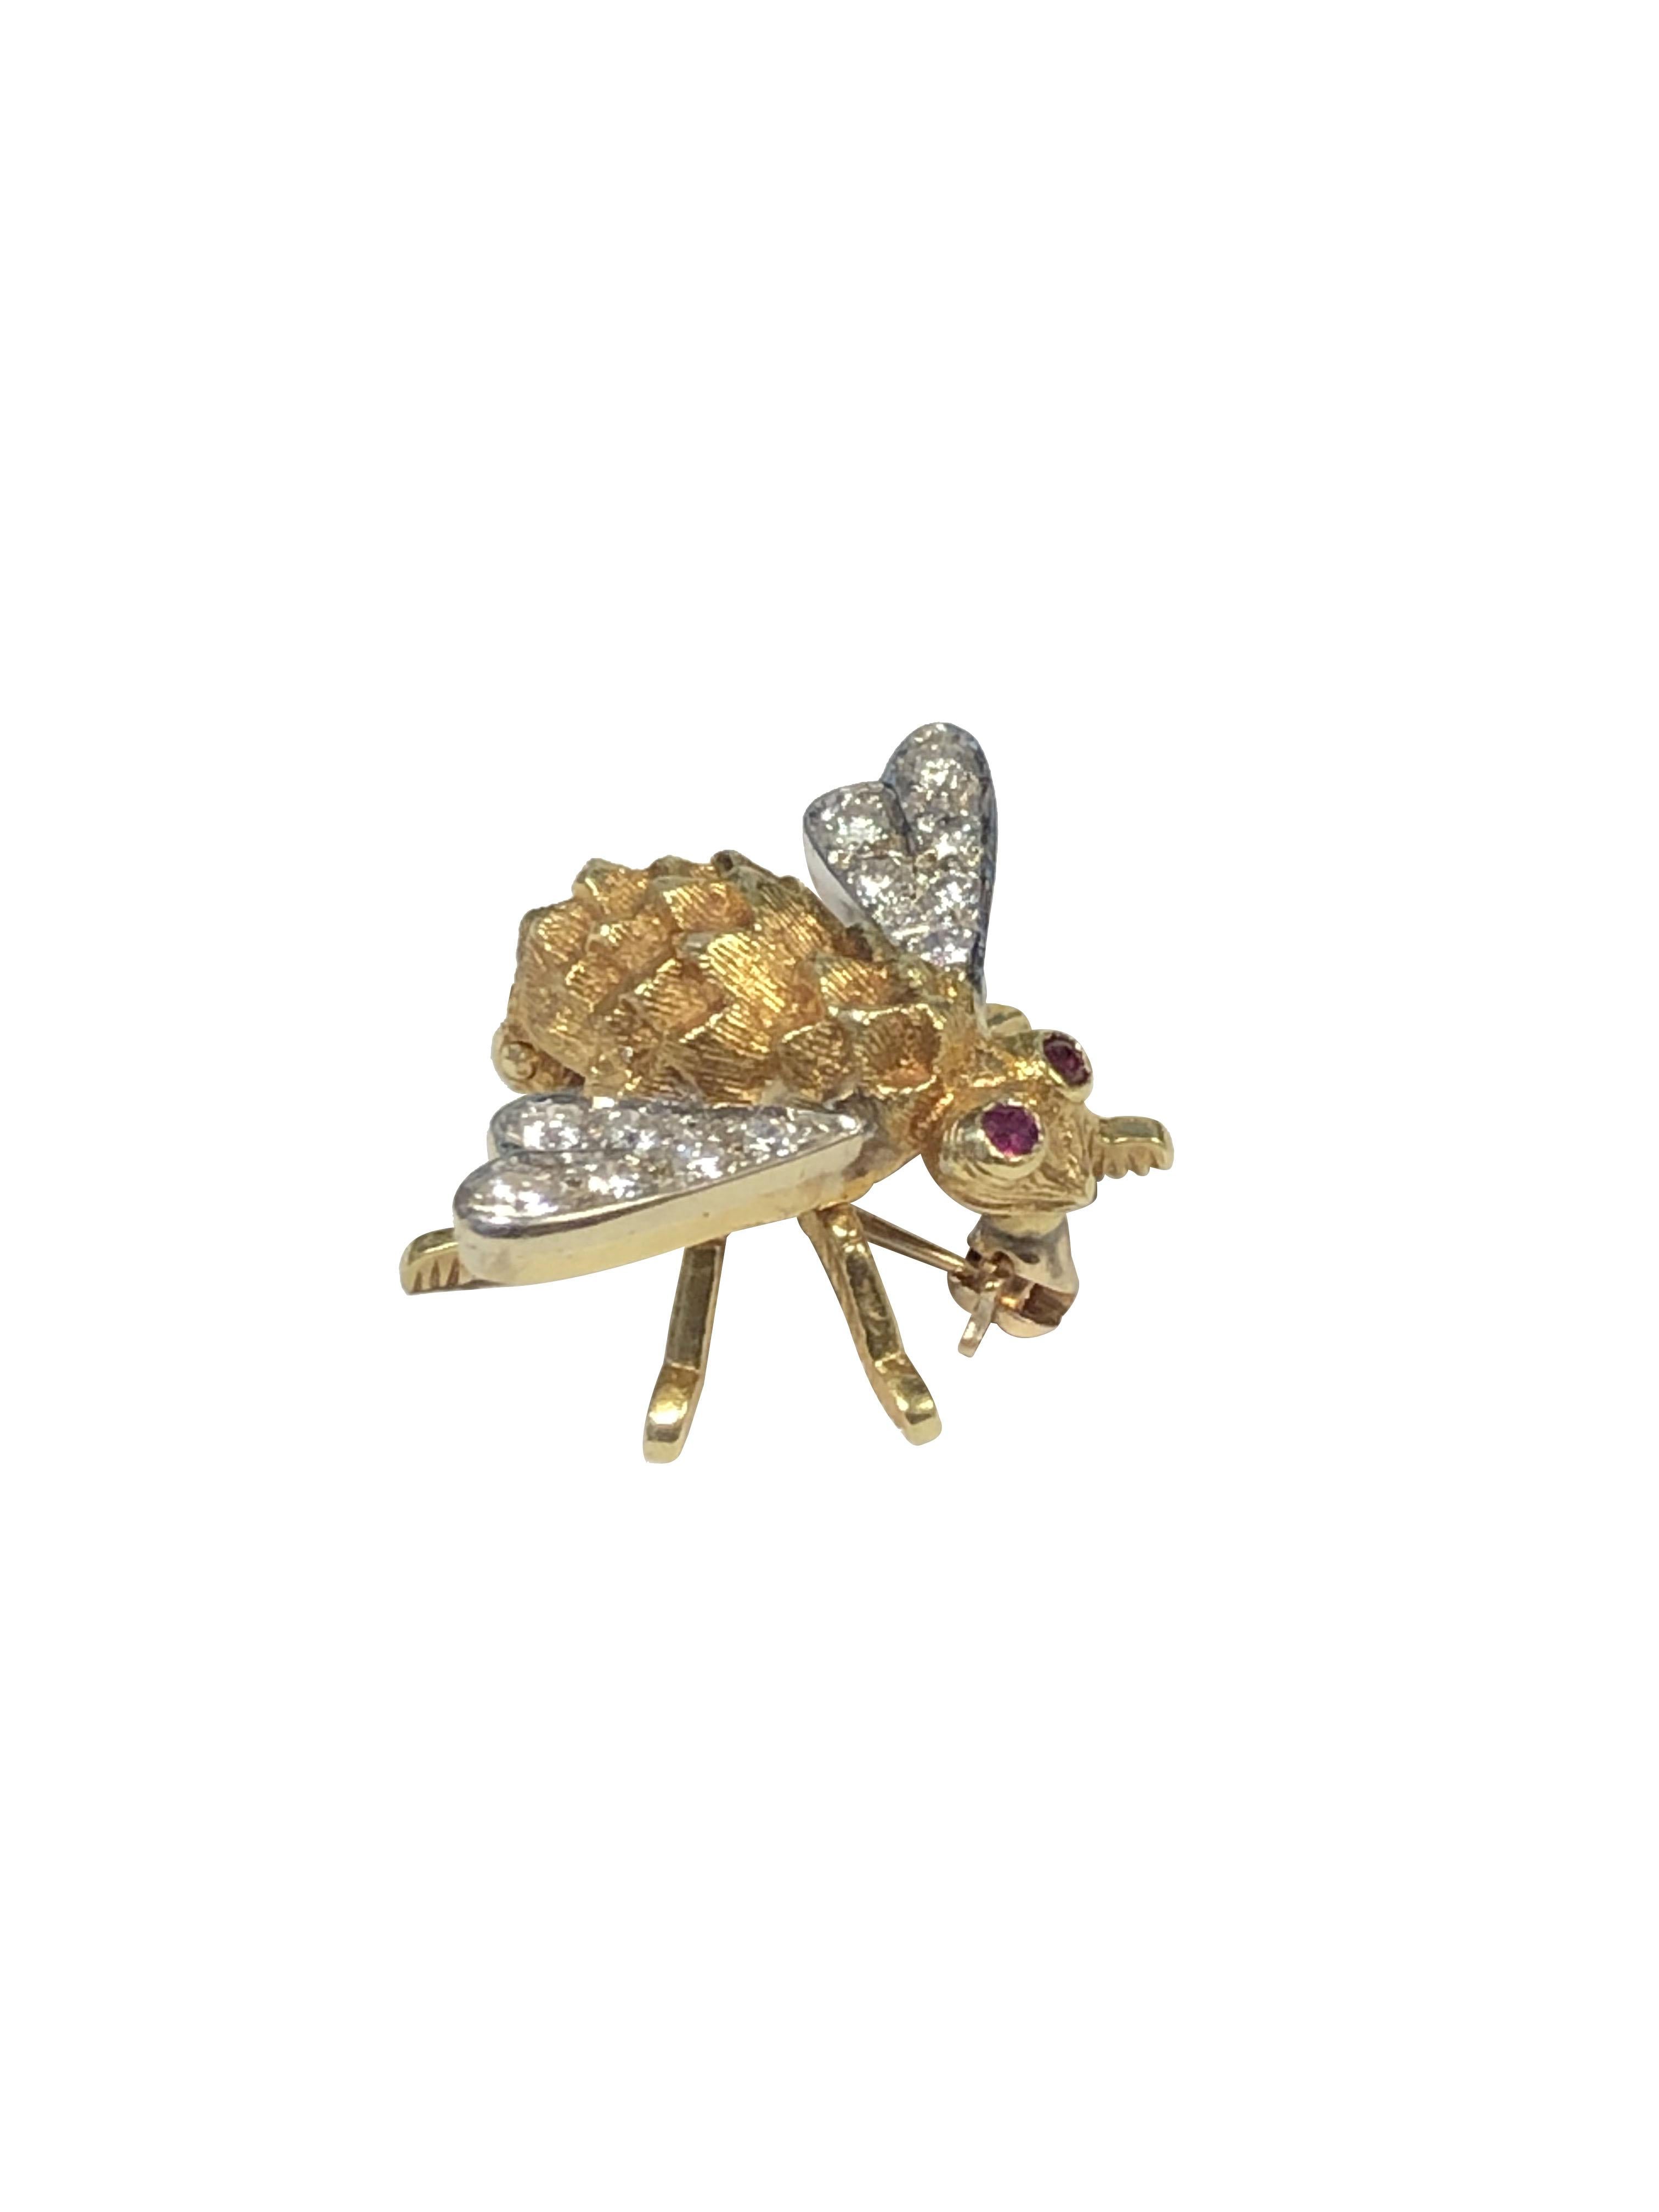 Circa 1970 Herbert Rosenthal  18k Yellow Gold Bee Brooch, measuring 1 inch from Wing tip to tip 3/4 inch in length and weighing 6.4 Grams. The white gold top wings are set with Round Brilliant cut Diamonds totaling 1/4 carats, further set with Ruby